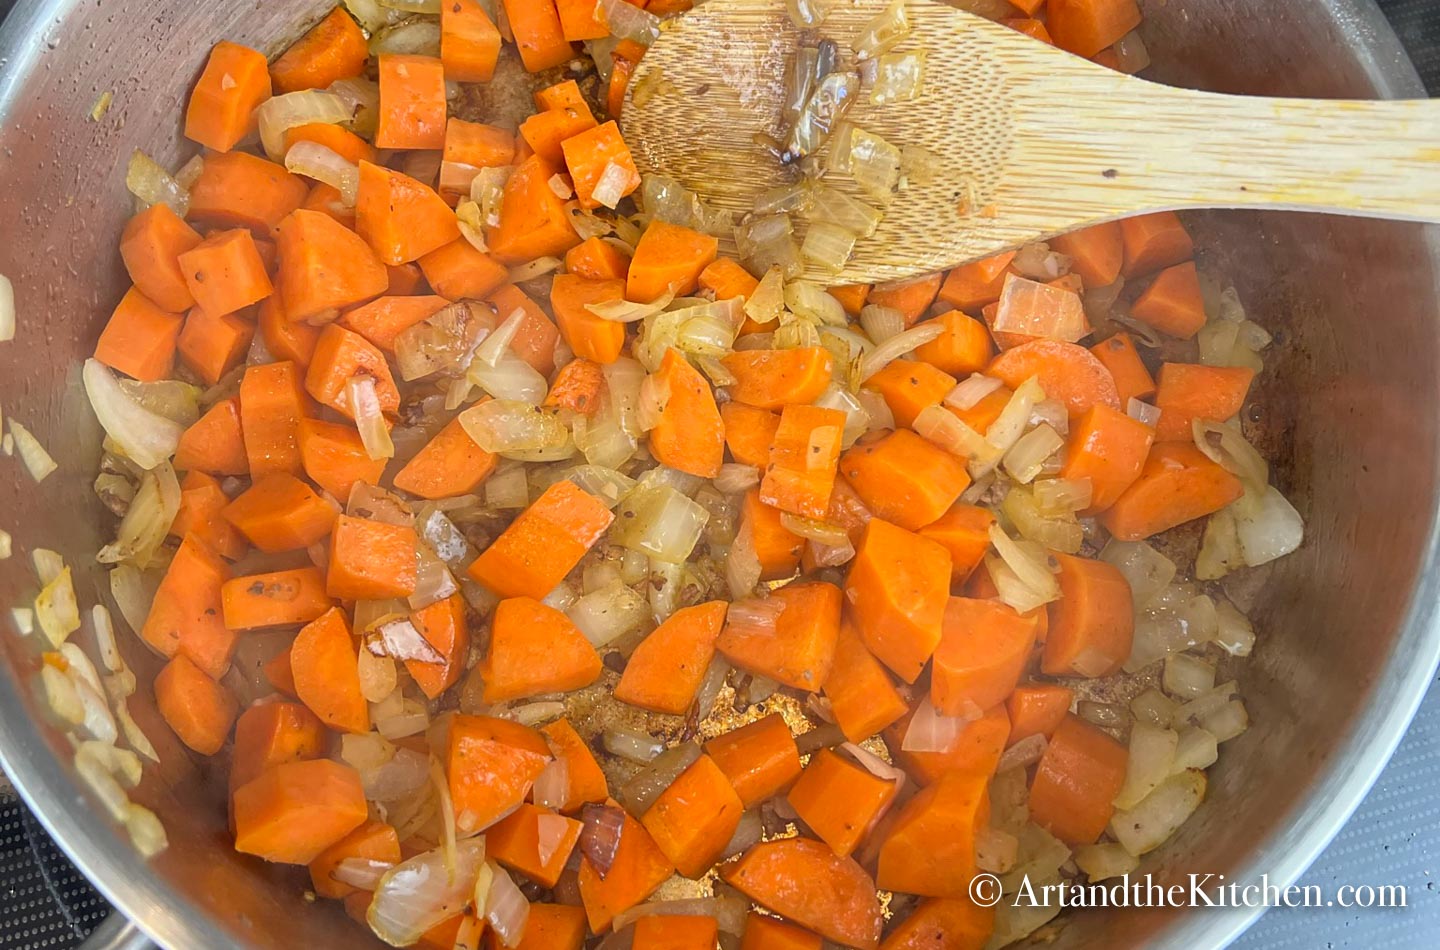 Carrots, onions and garlic cooking in stainless steel skillet. Wooden spoon stirring mixture.